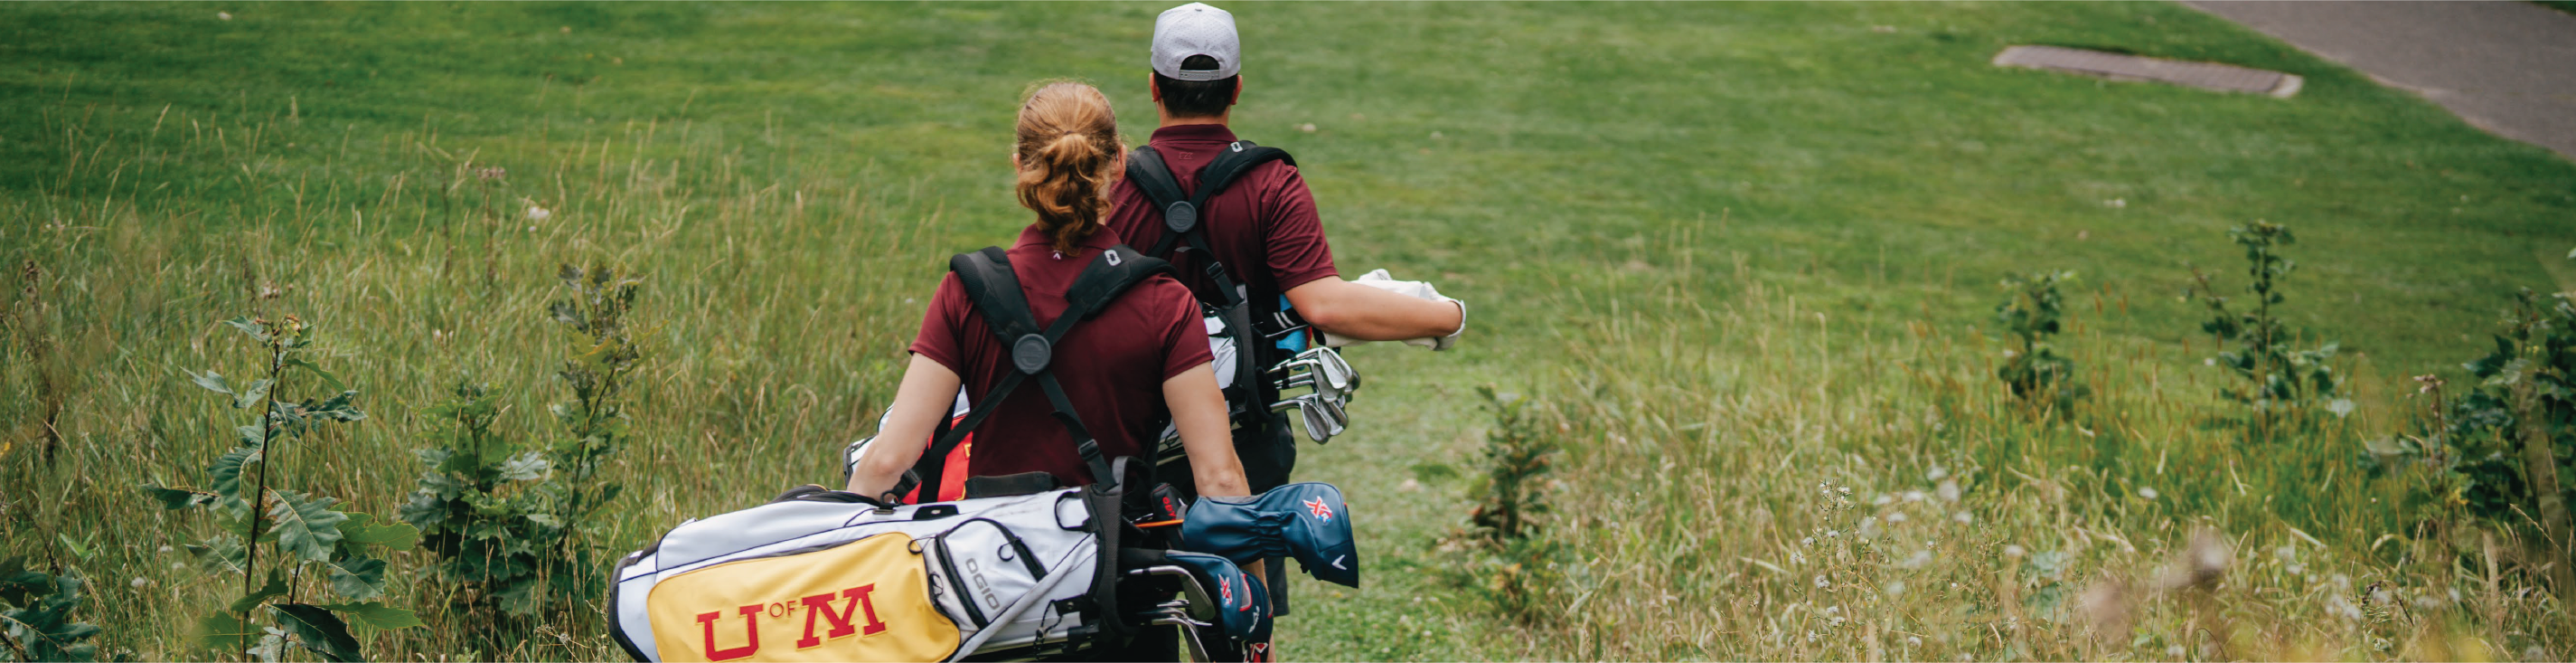 Two golfers walking down grassy hill on course with golf bags on back.